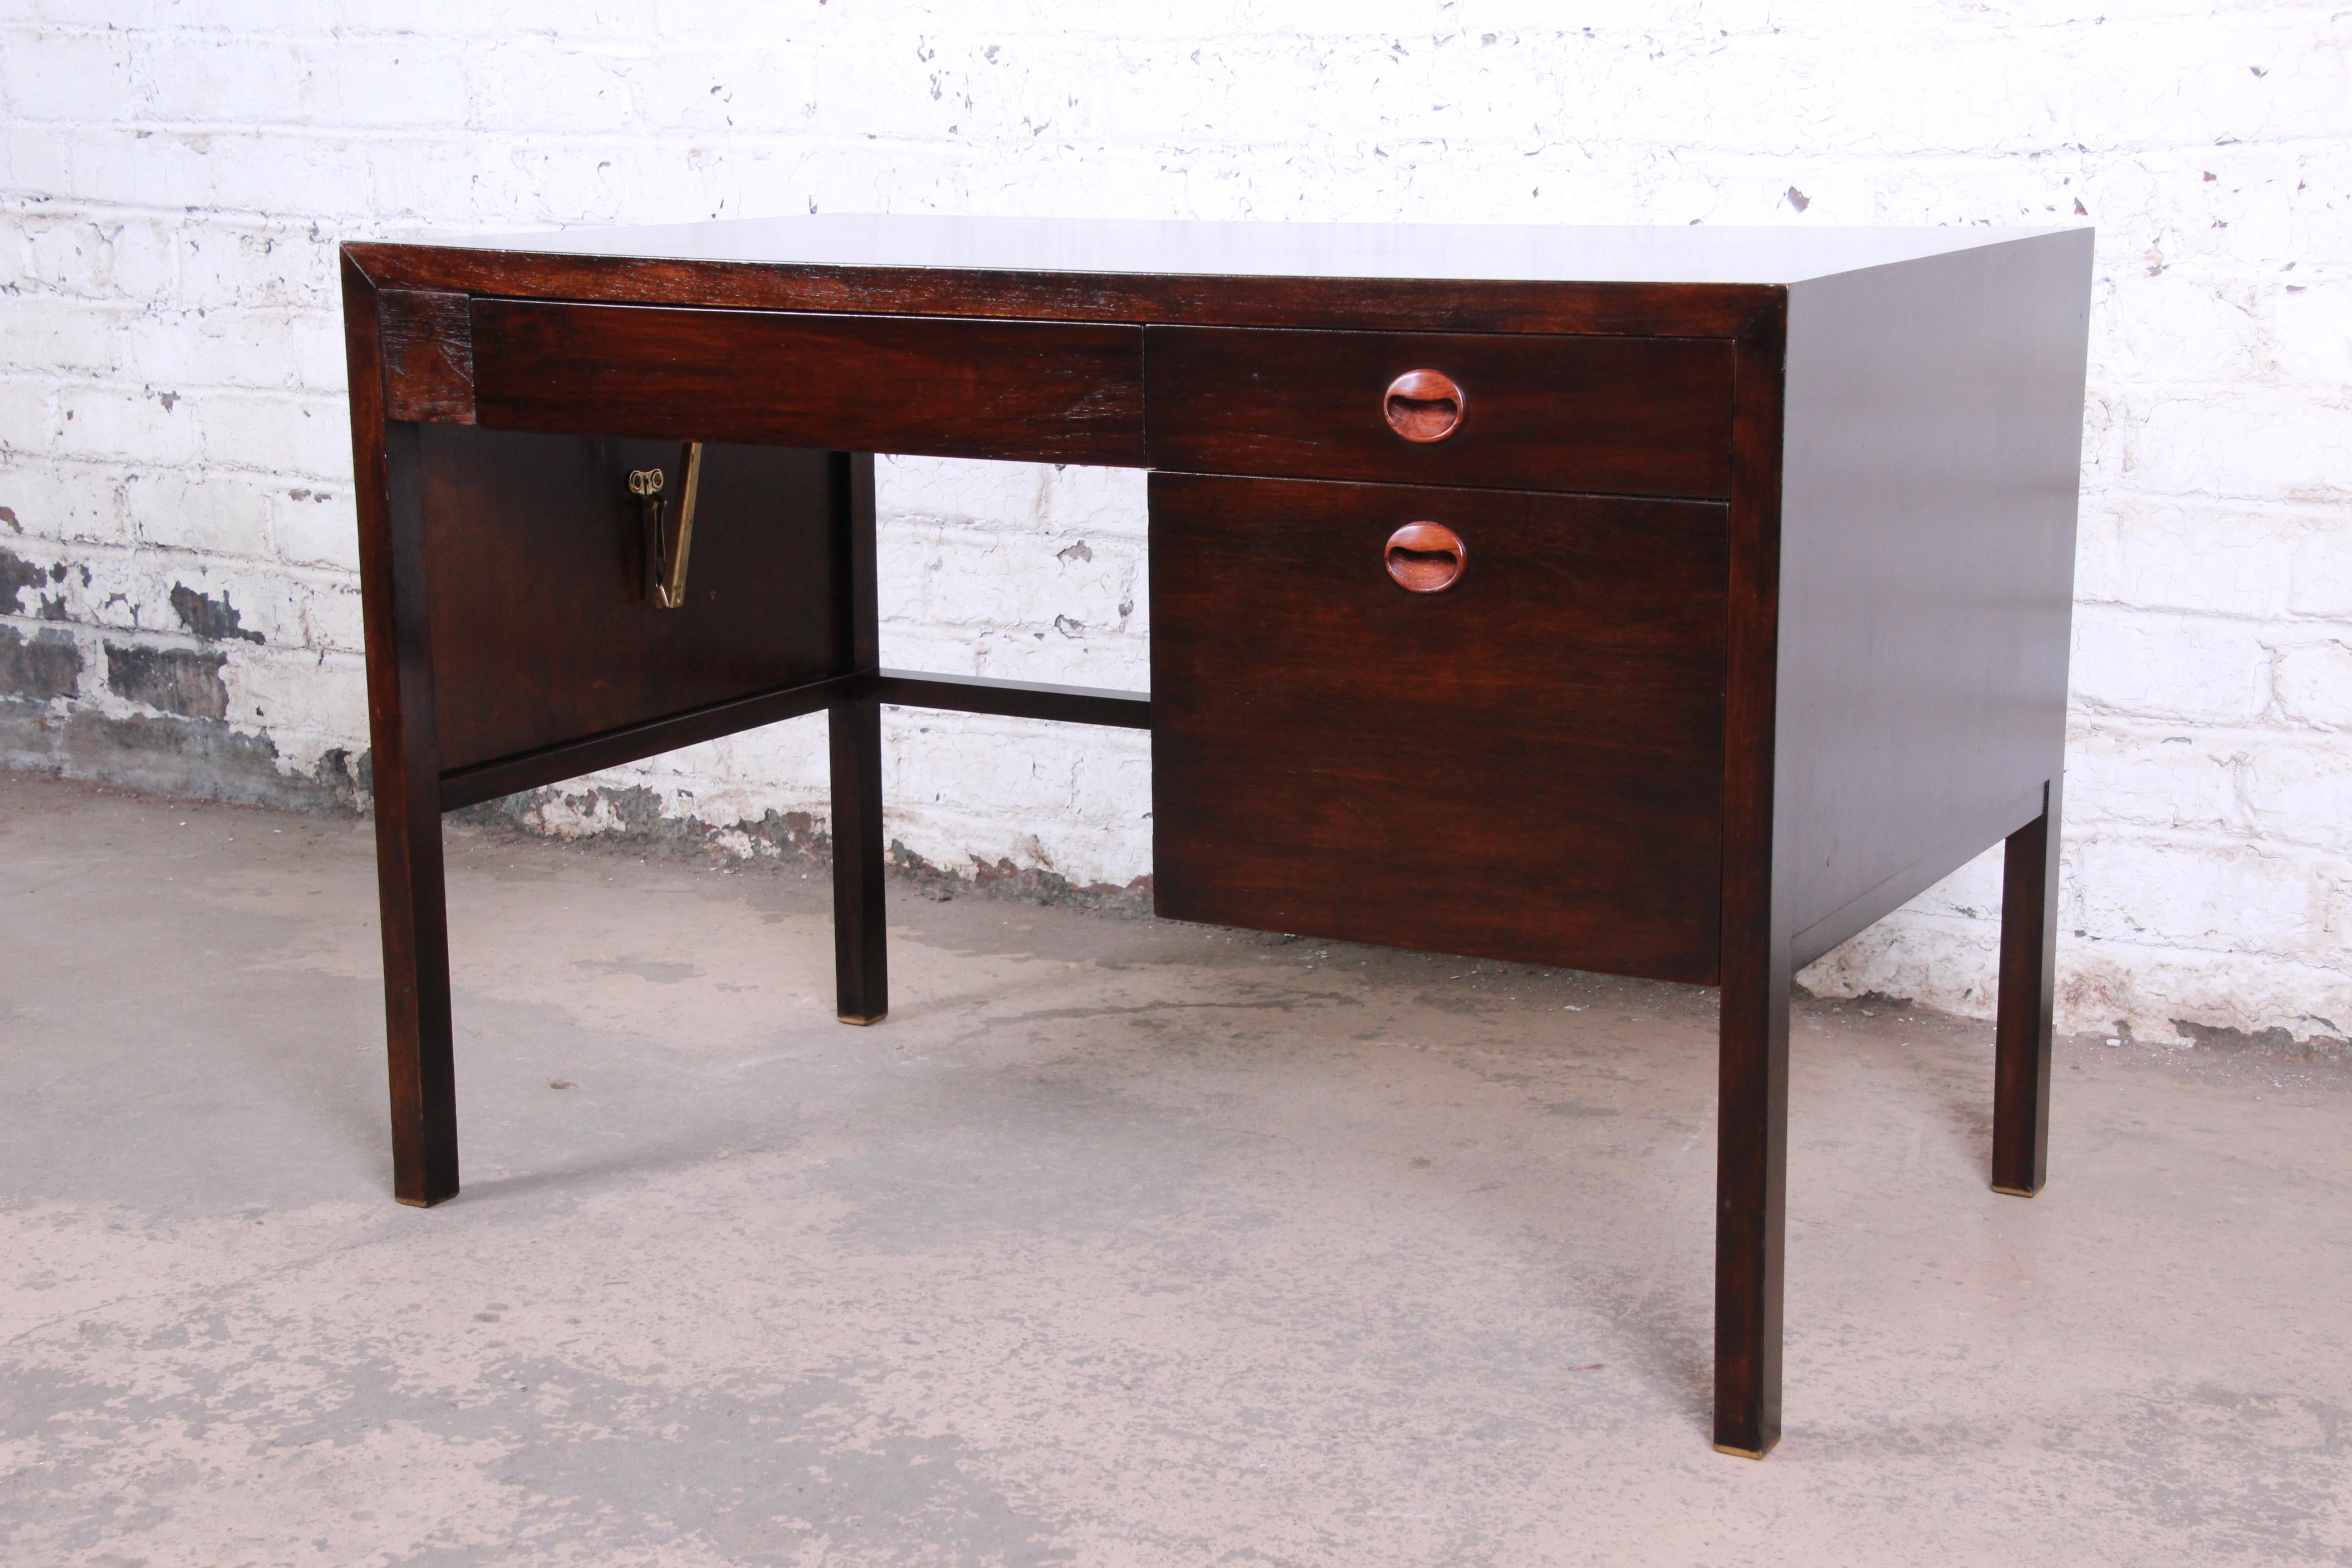 An exceptional Mid-Century Modern drop-leaf desk designed by Edward Wormley for Dunbar. The desk features rich mahogany wood grain with carved rosewood drawer pulls. It offers good storage, with three drawers. The desk has a unique design, with a